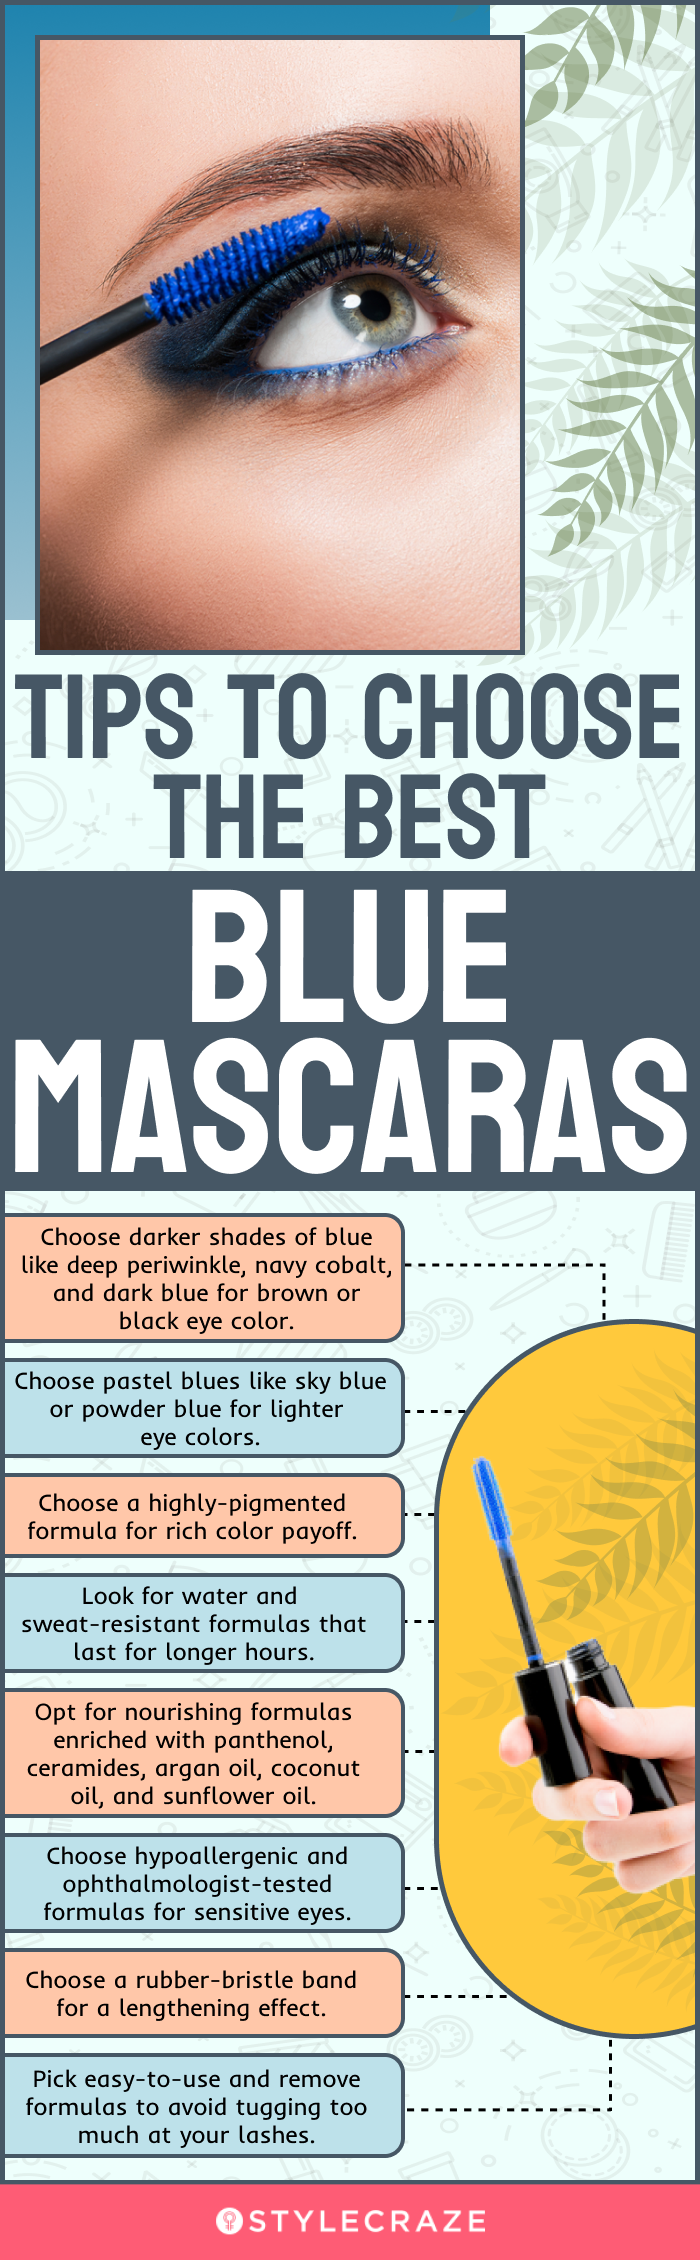 Tips To Choose The Best Blue Mascaras